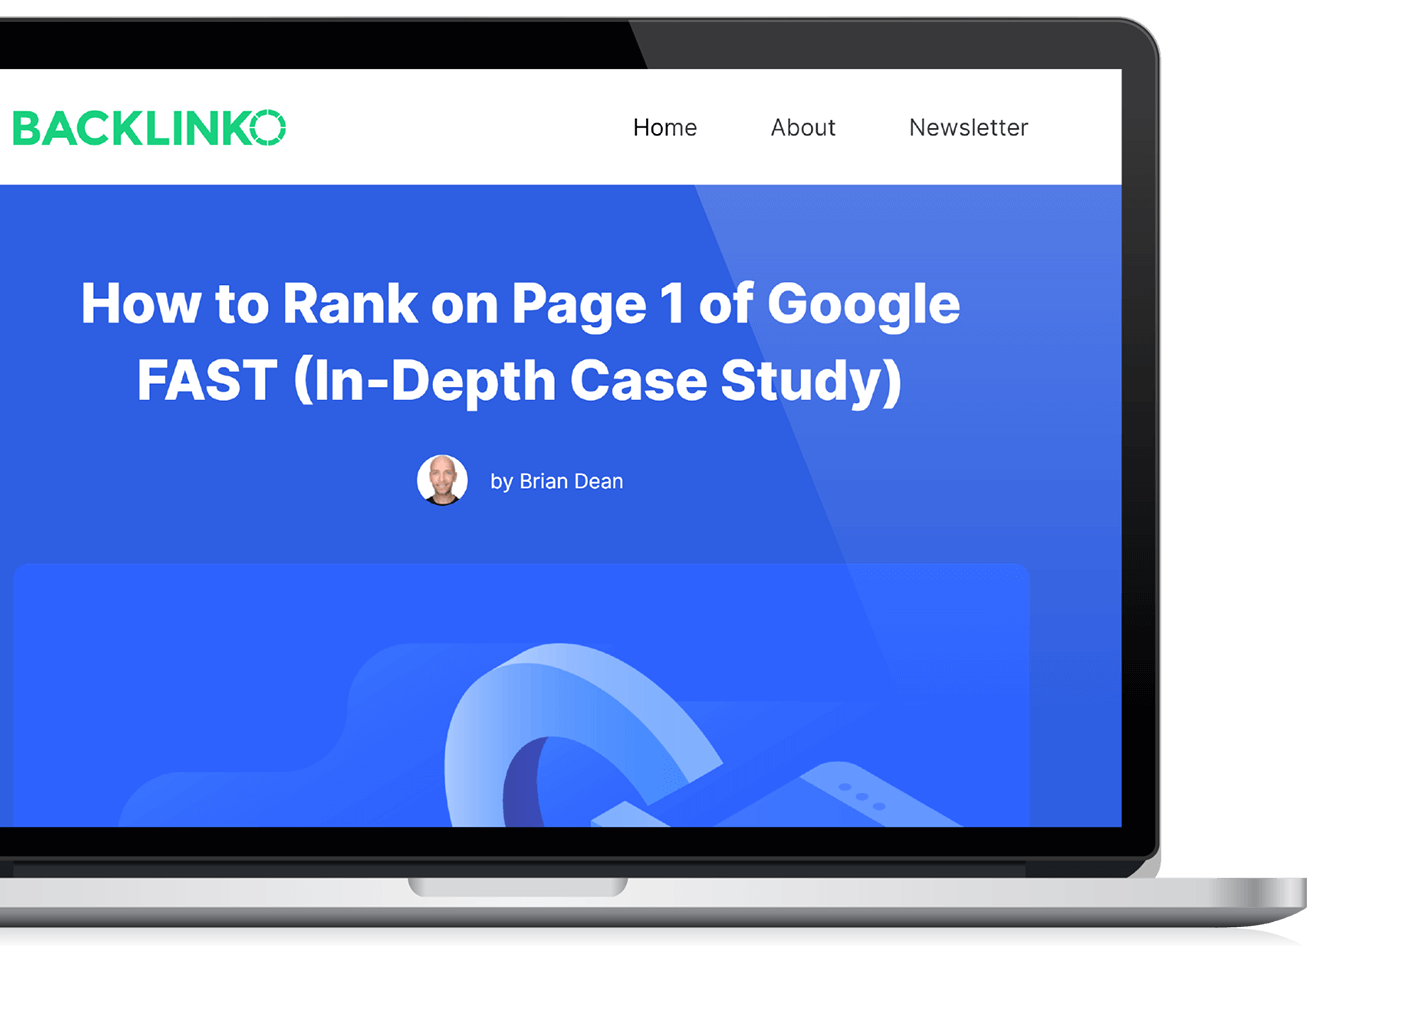 How to Rank on Page 1 of Google FAST (In-Depth Case Study)